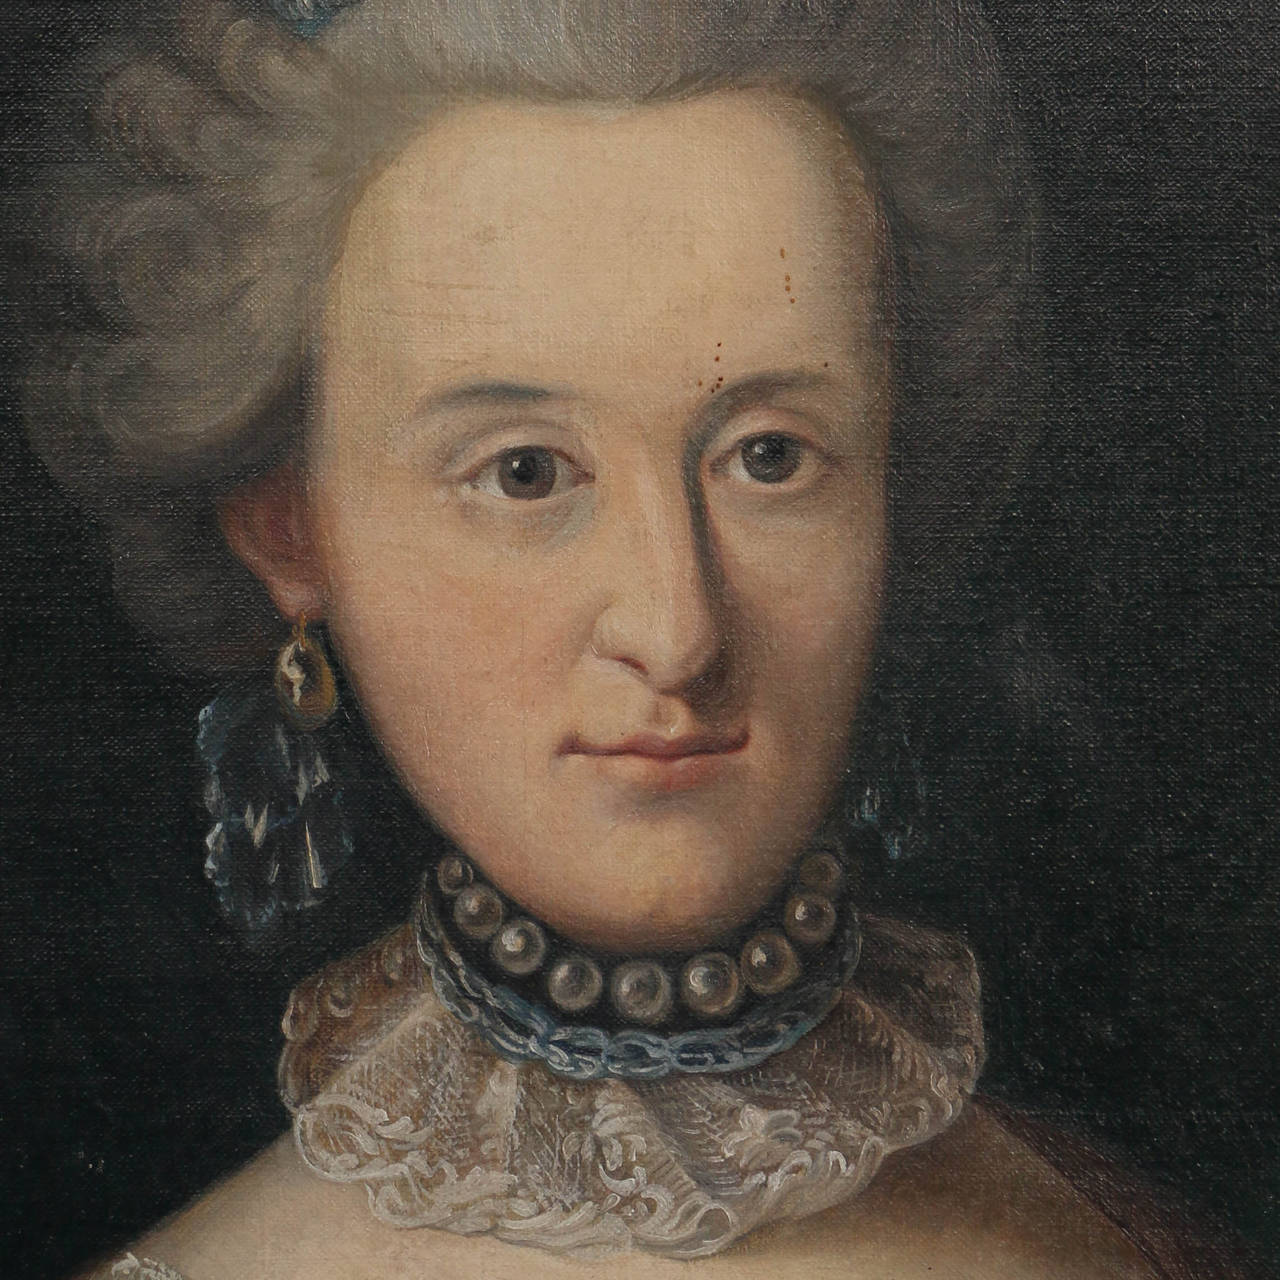 Original oil on canvas, portrait of elegant woman. Christine Marie Middelboe (1742-1807) was the wife of Bishop Stephan Middelboe. Signed and dated on the reverse Svend Rønne 1937. This portrait was commissioned as one of a pair along with her